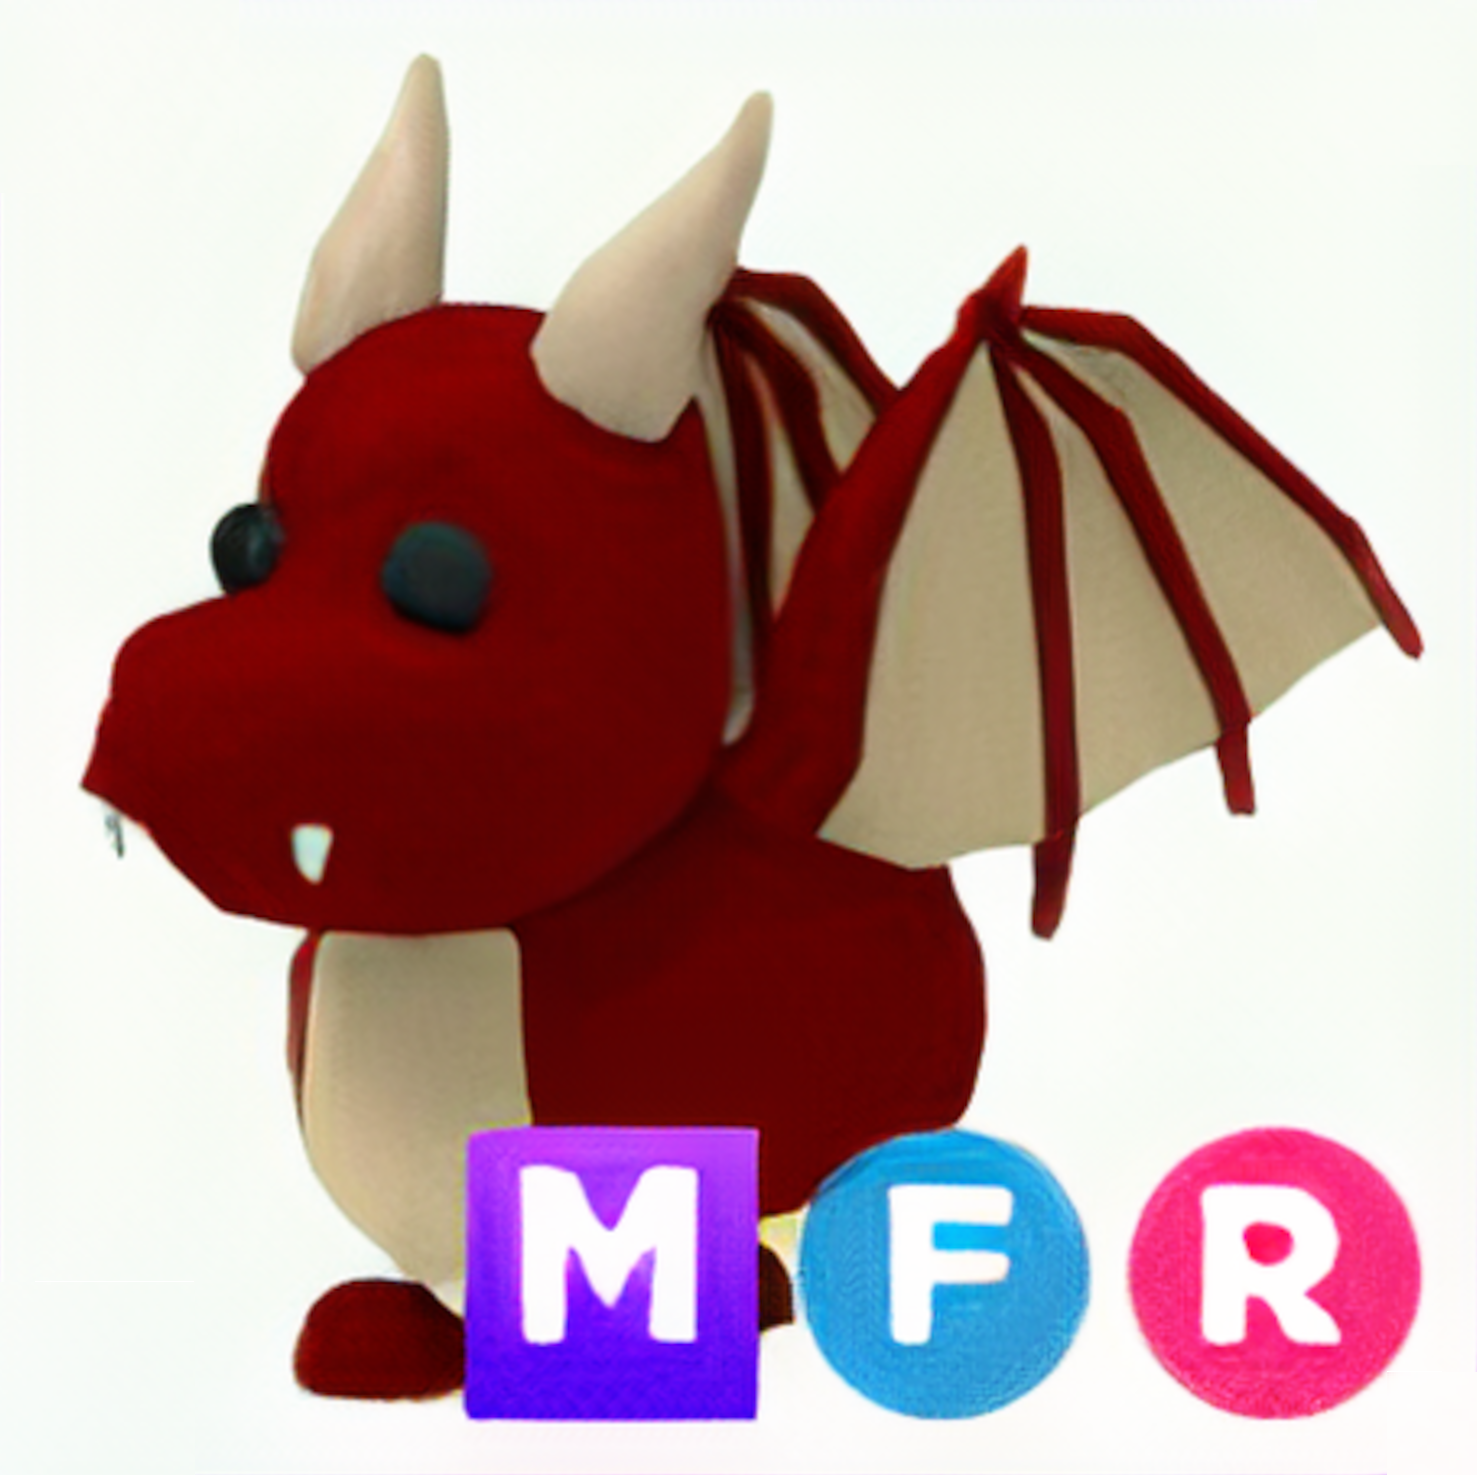 ADOPT ME Roblox Pets Legendary Fly, Ride, Meganeon Oman